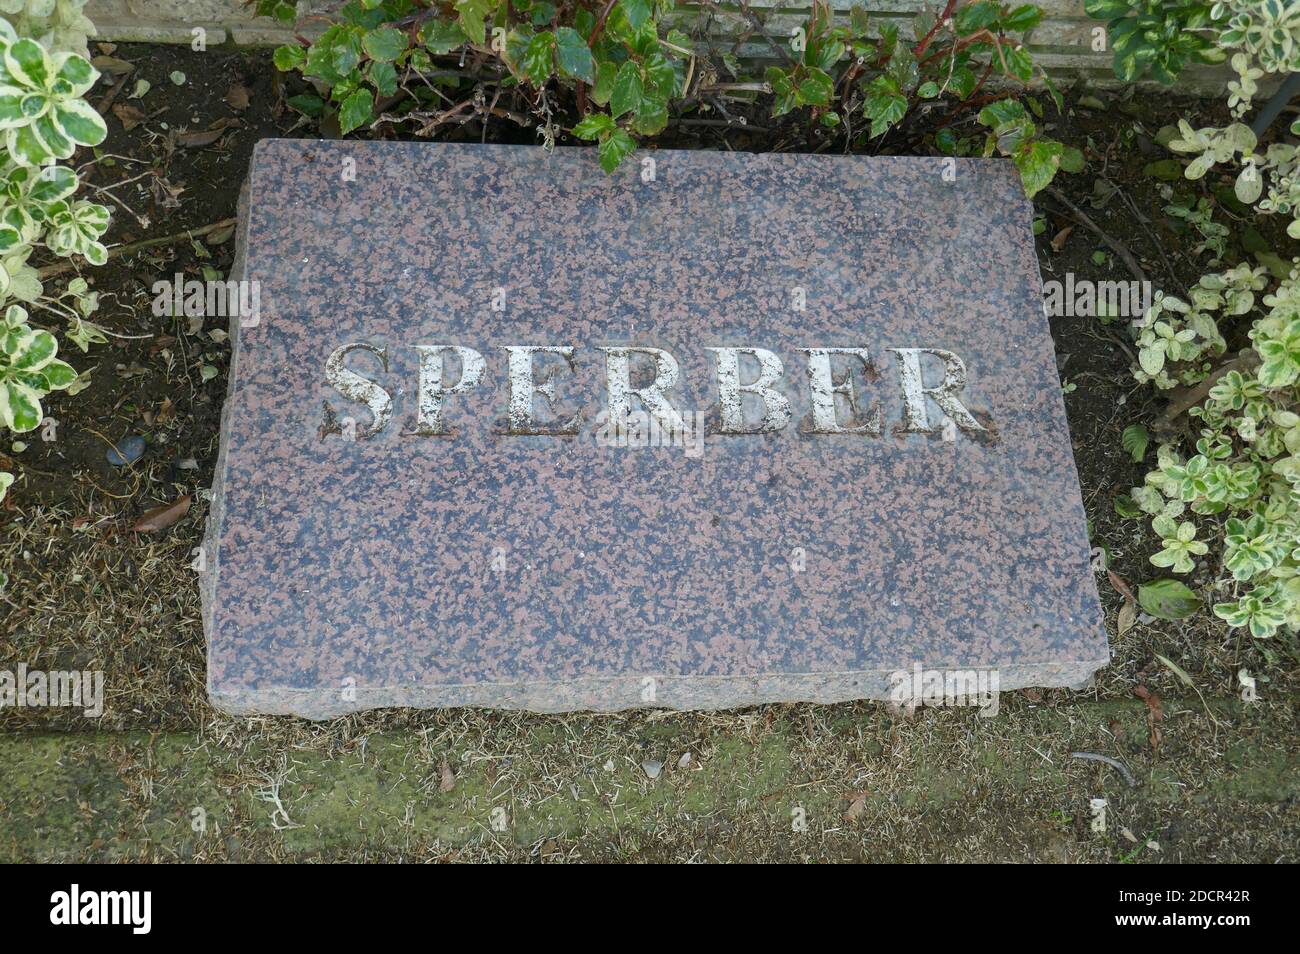 Los Angeles, California, USA 17th November 2020 A general view of atmosphere of actress Wendie Jo Sperber's Grave at Mount Sinai Cemetery Hollywood Hills on November 17, 2020 in Los Angeles, California, USA. Photo by Barry King/Alamy Stock Photo Stock Photo